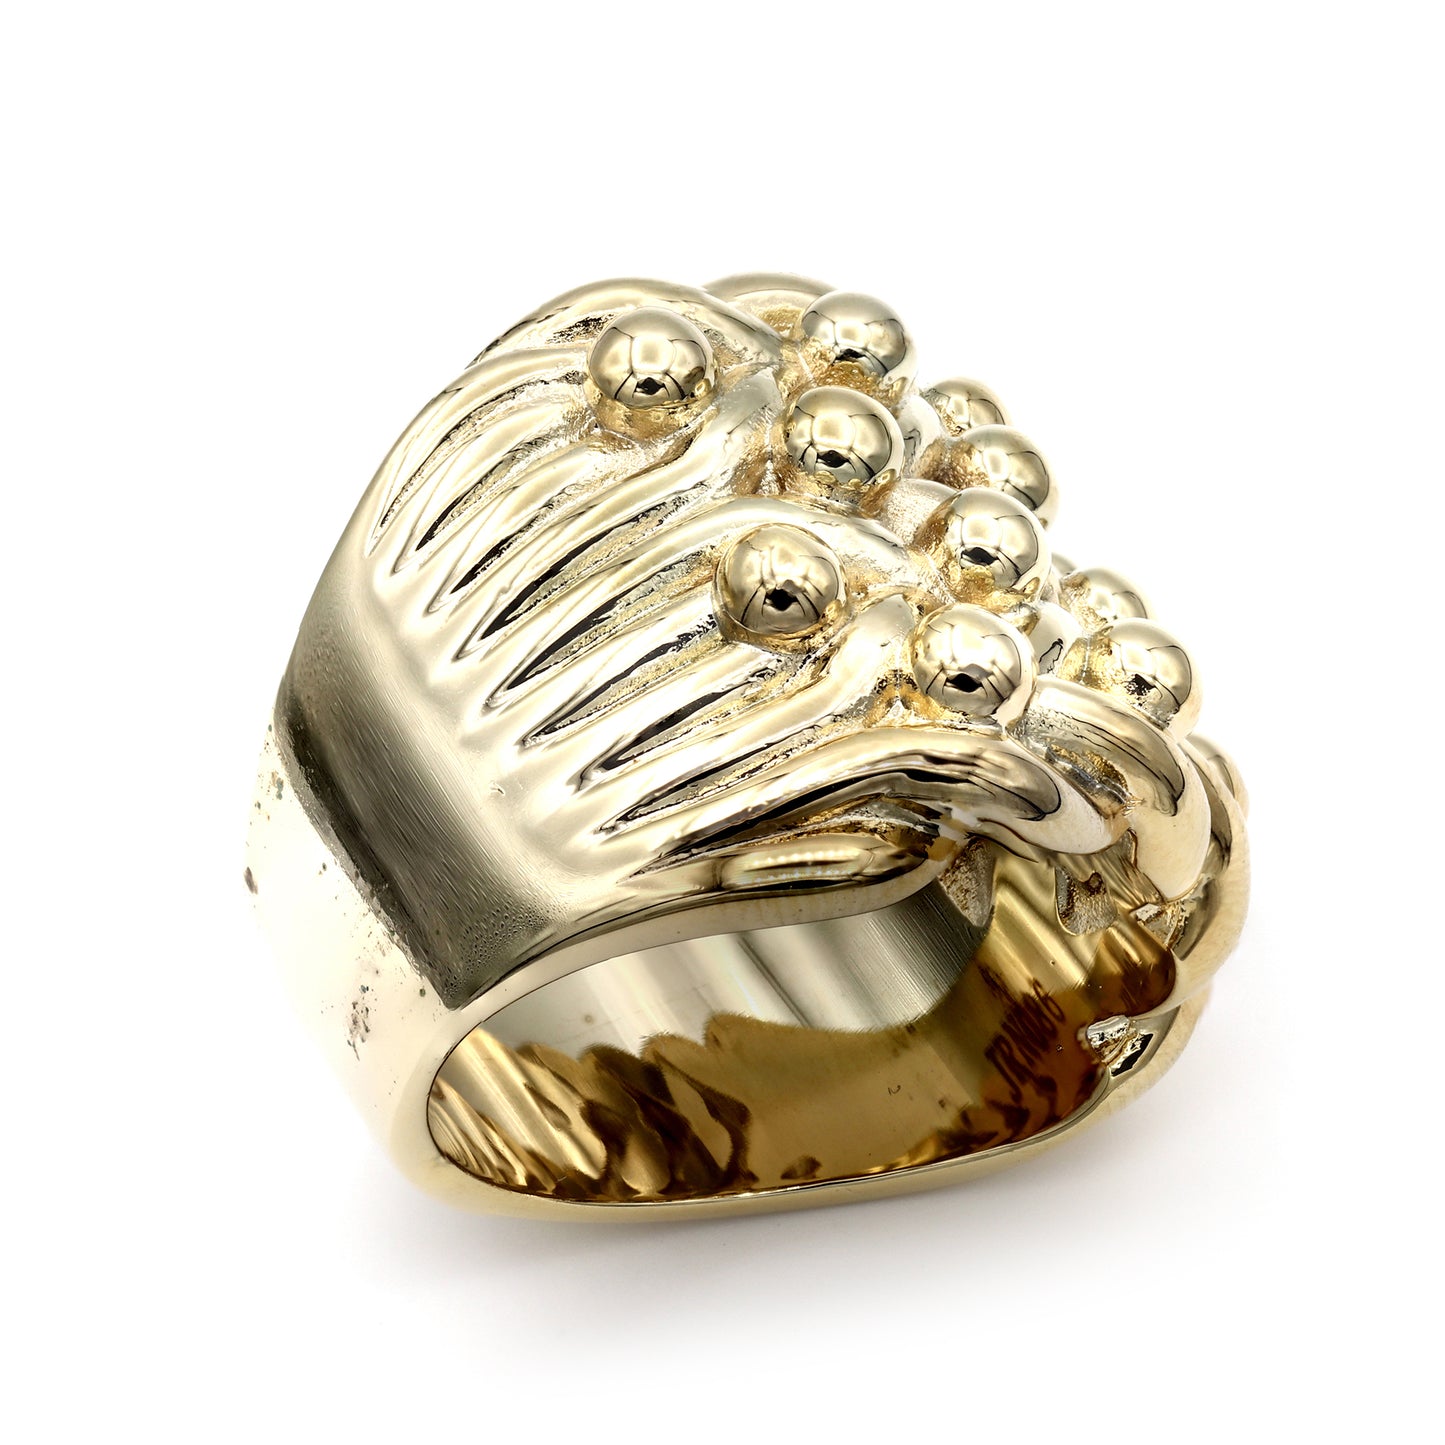 Flash-plated Brass  4 Row King George III Keeper Ring 23mm Size Z1 - BRN086